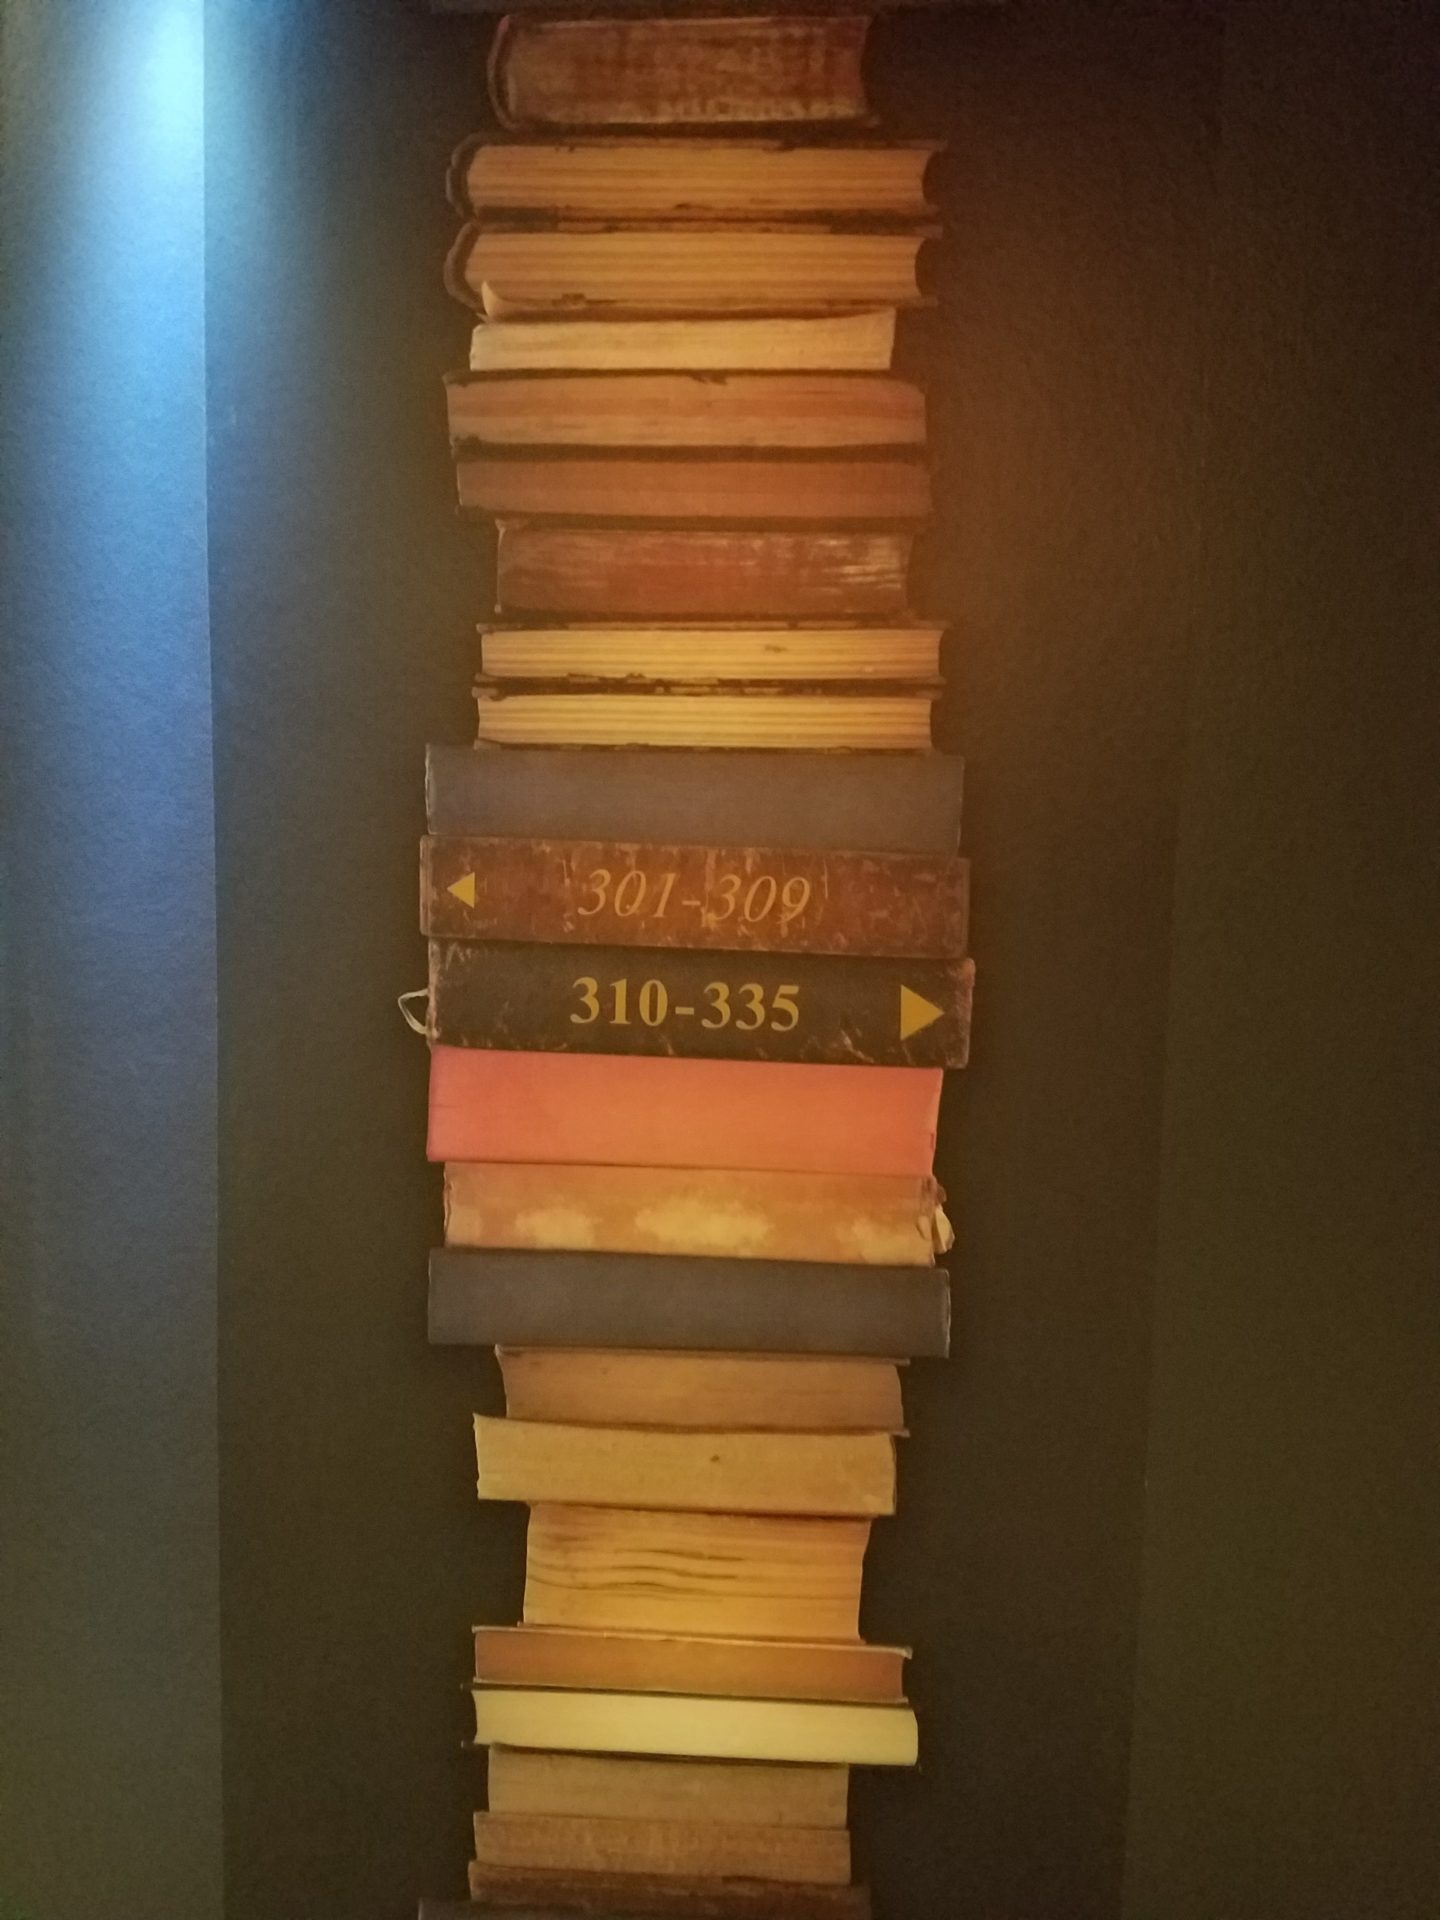 a stack of books on a shelf